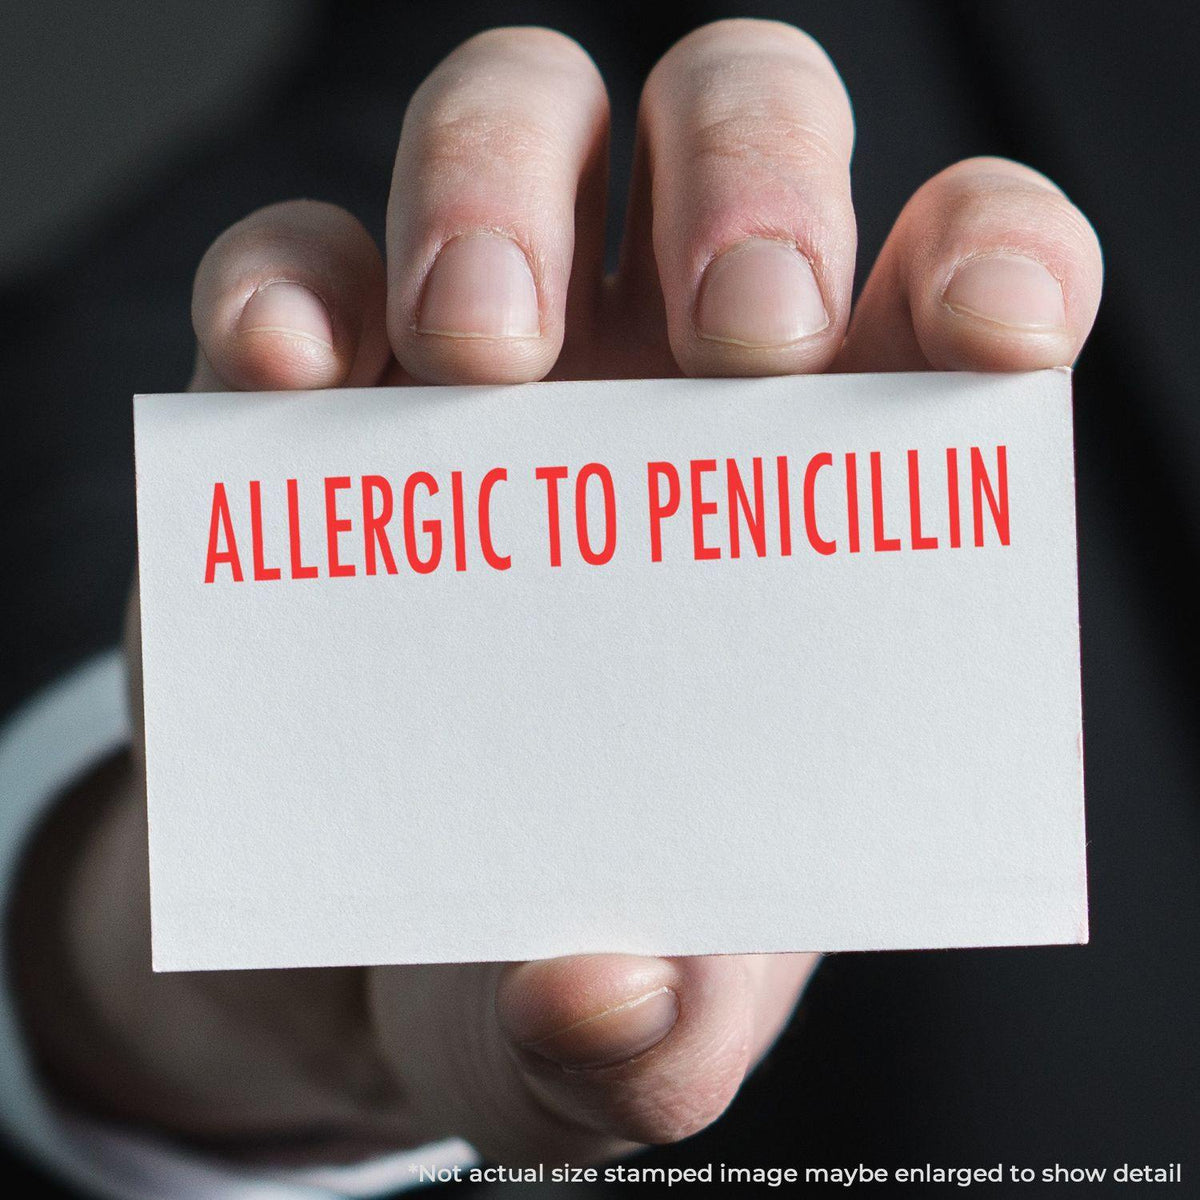 Large Allergic To Penicillin Rubber Stamp In Use Photo